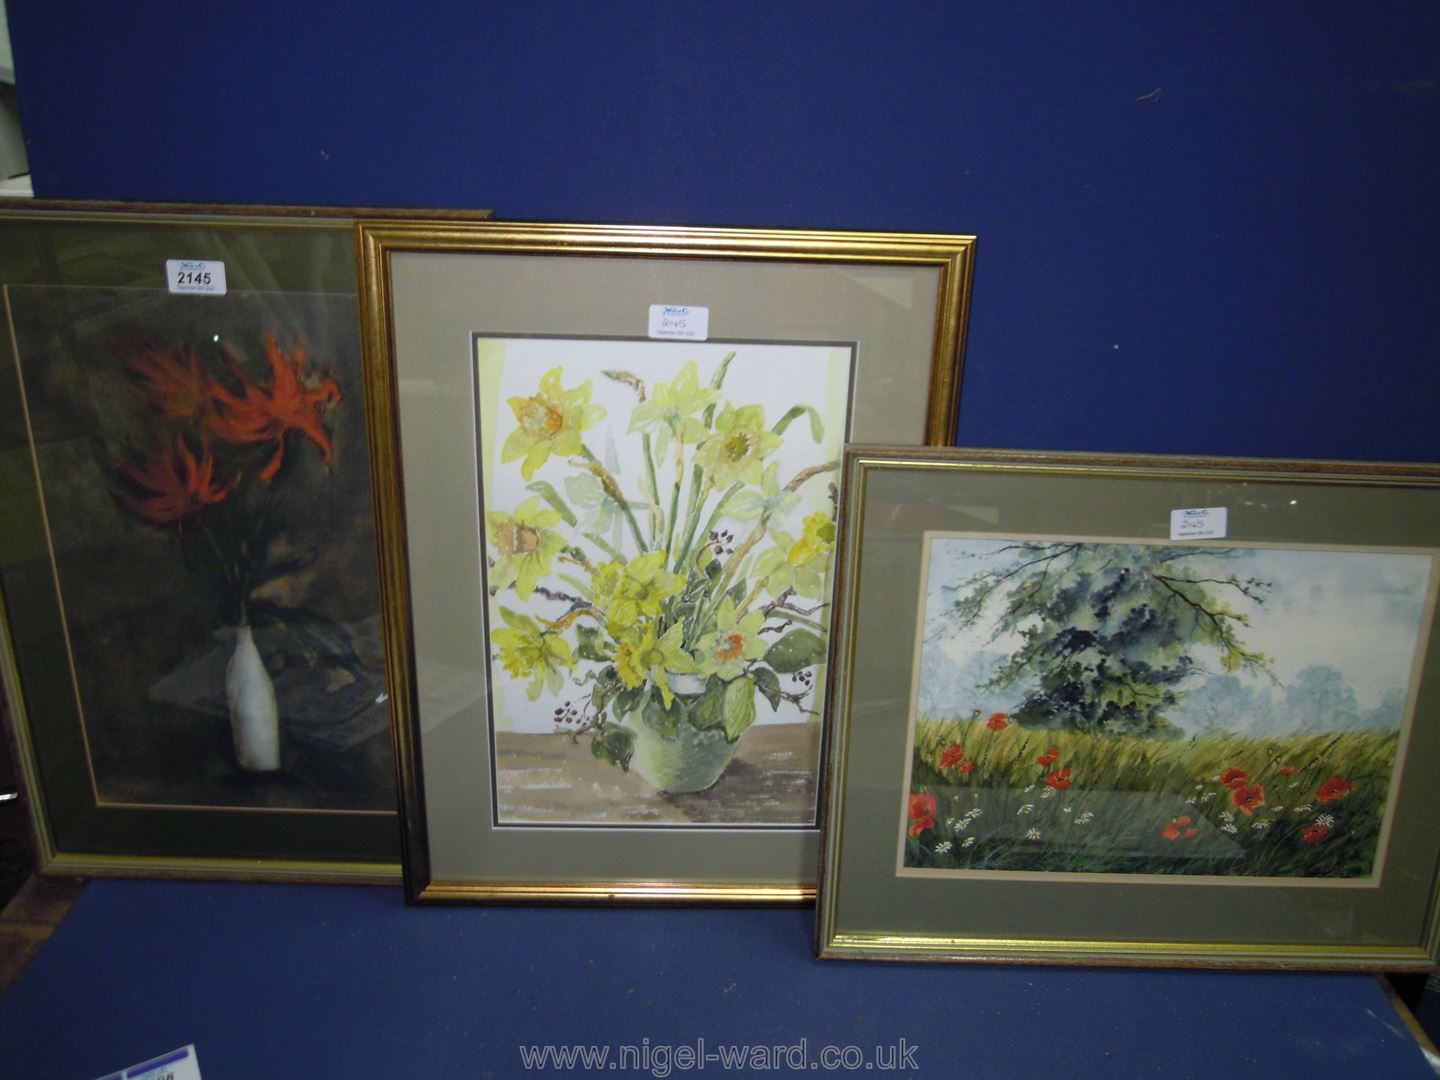 A framed and mounted Watercolour of Poppies and Daisies in a field;